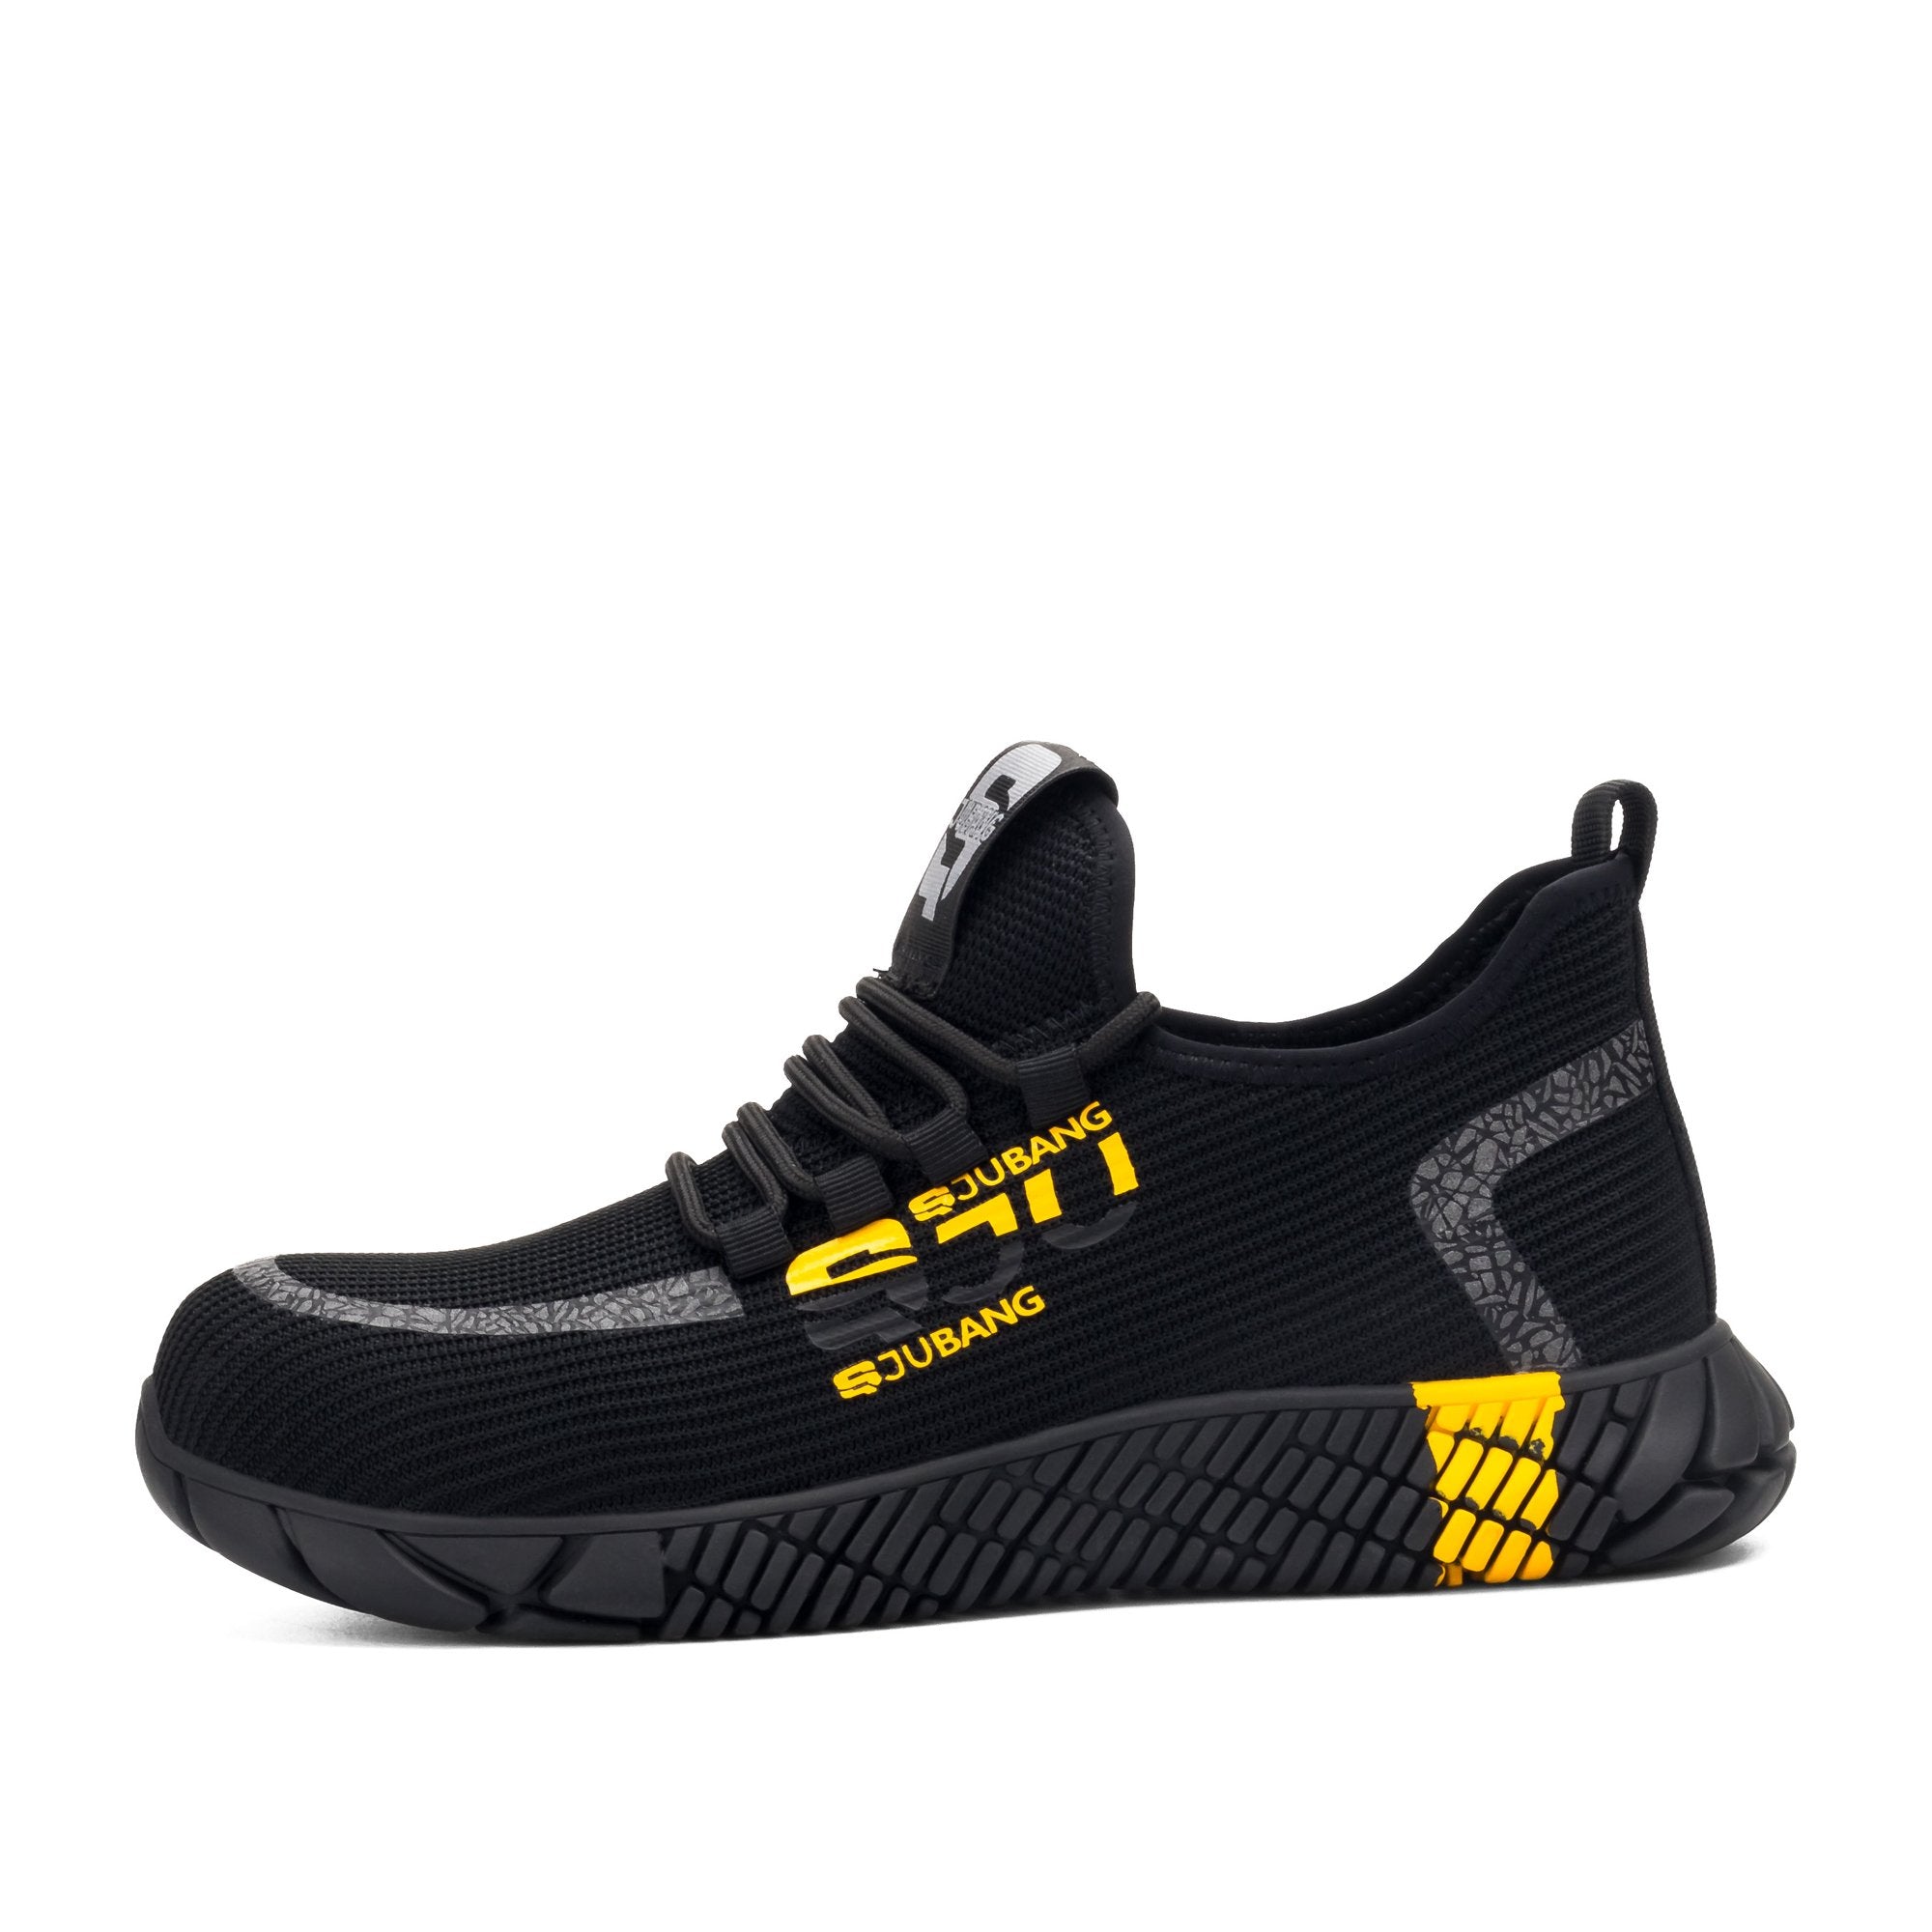 S Series Black Yellow - Indestructible Shoes